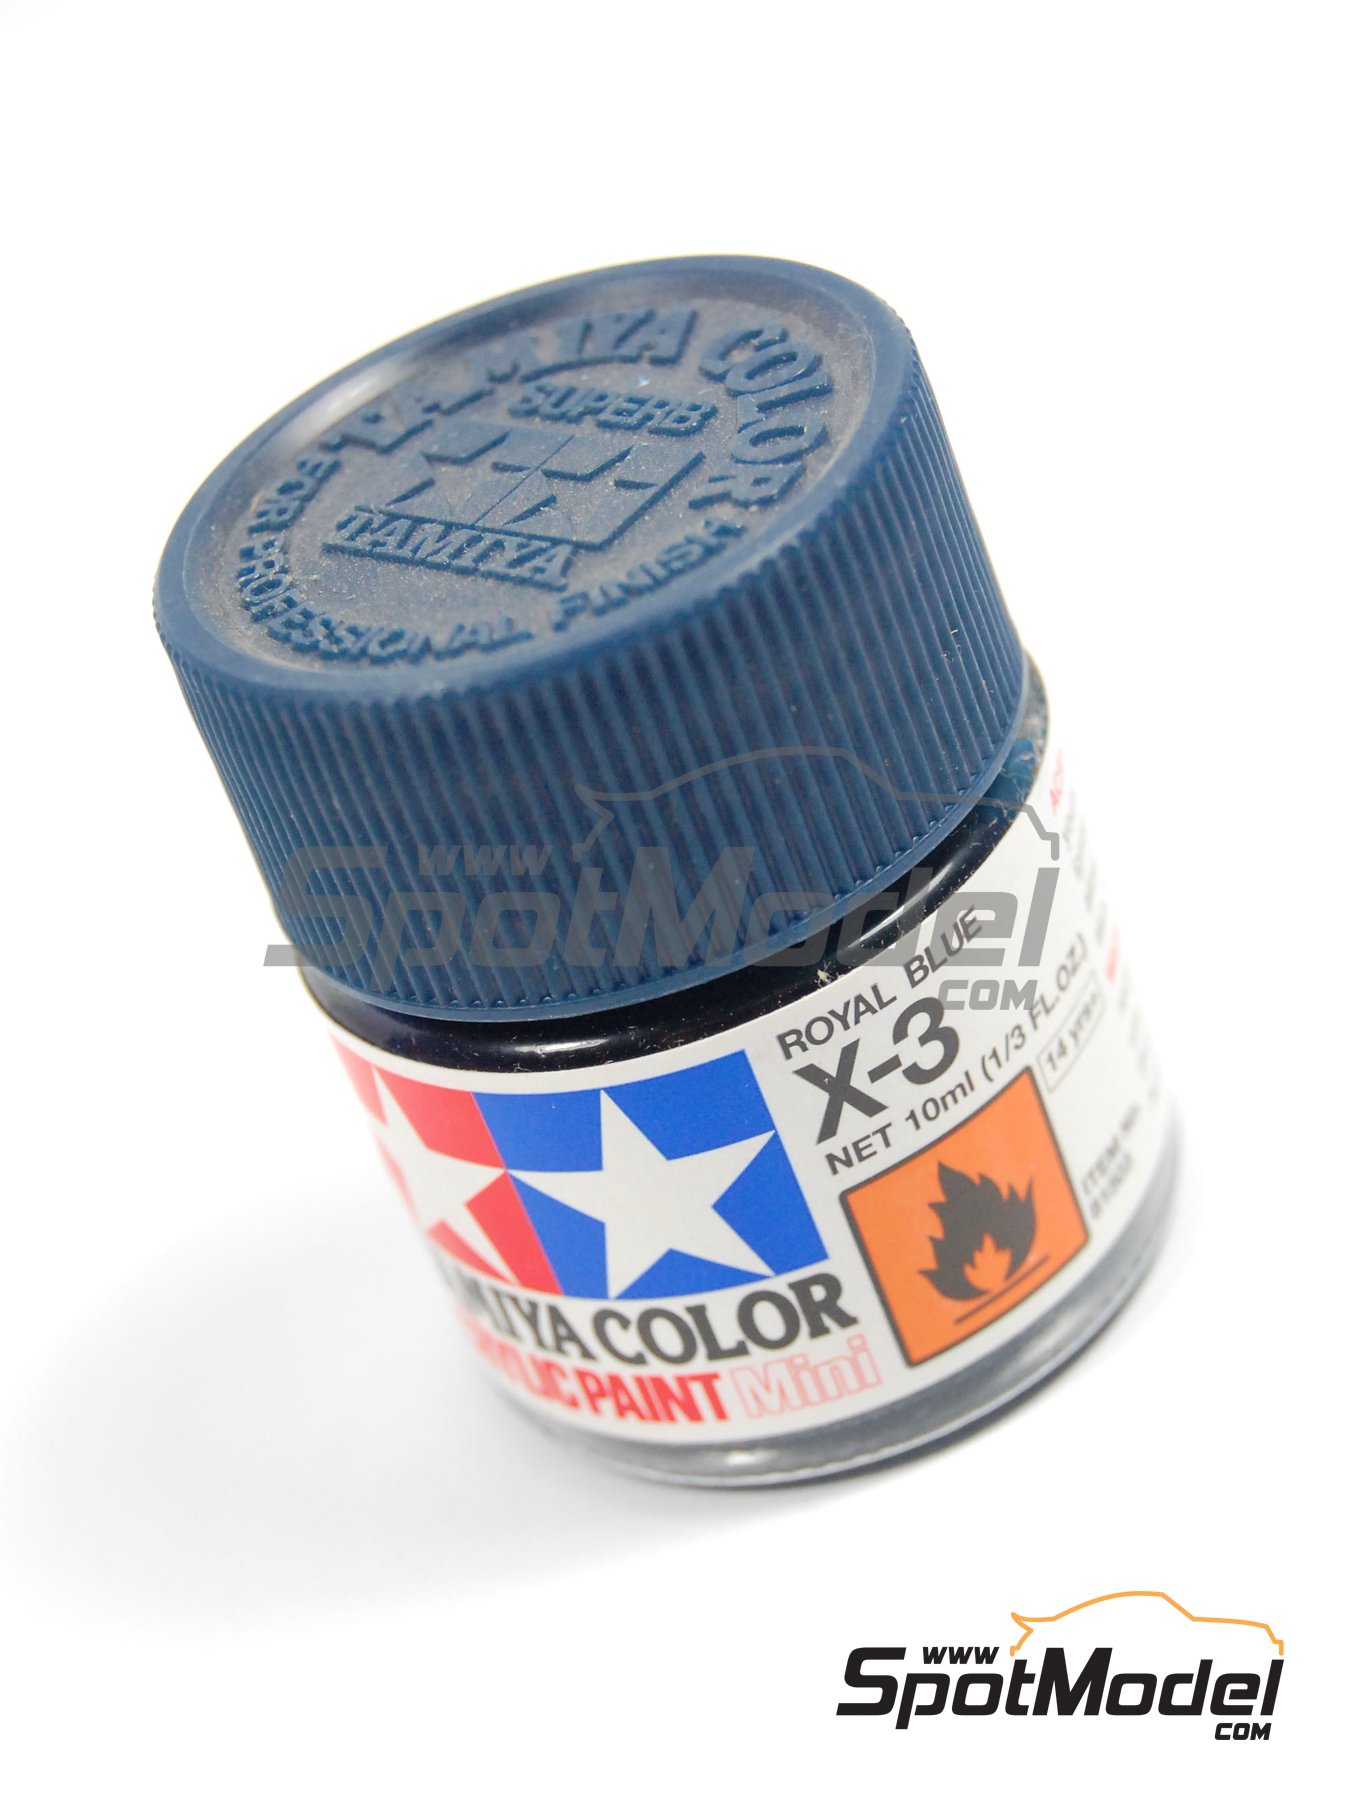 Mr. Color Lacquer Paint (10 ml bottle) - Select From Various Different  Colors